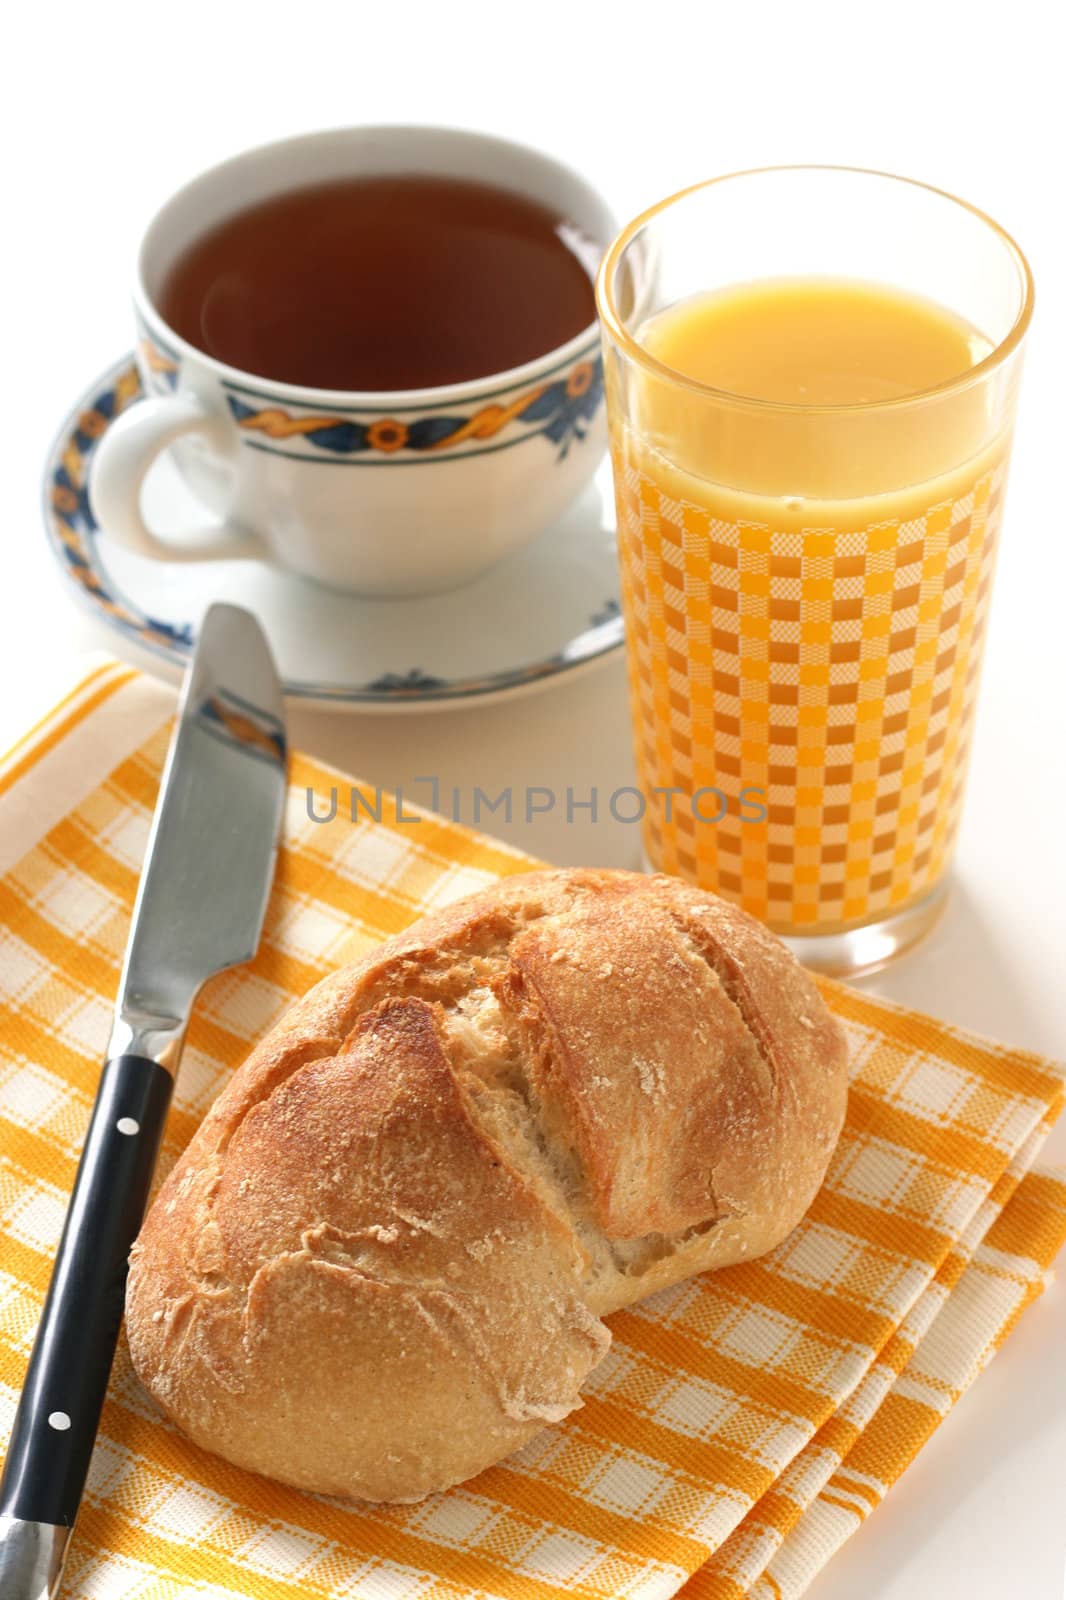 Bread with tea and juice